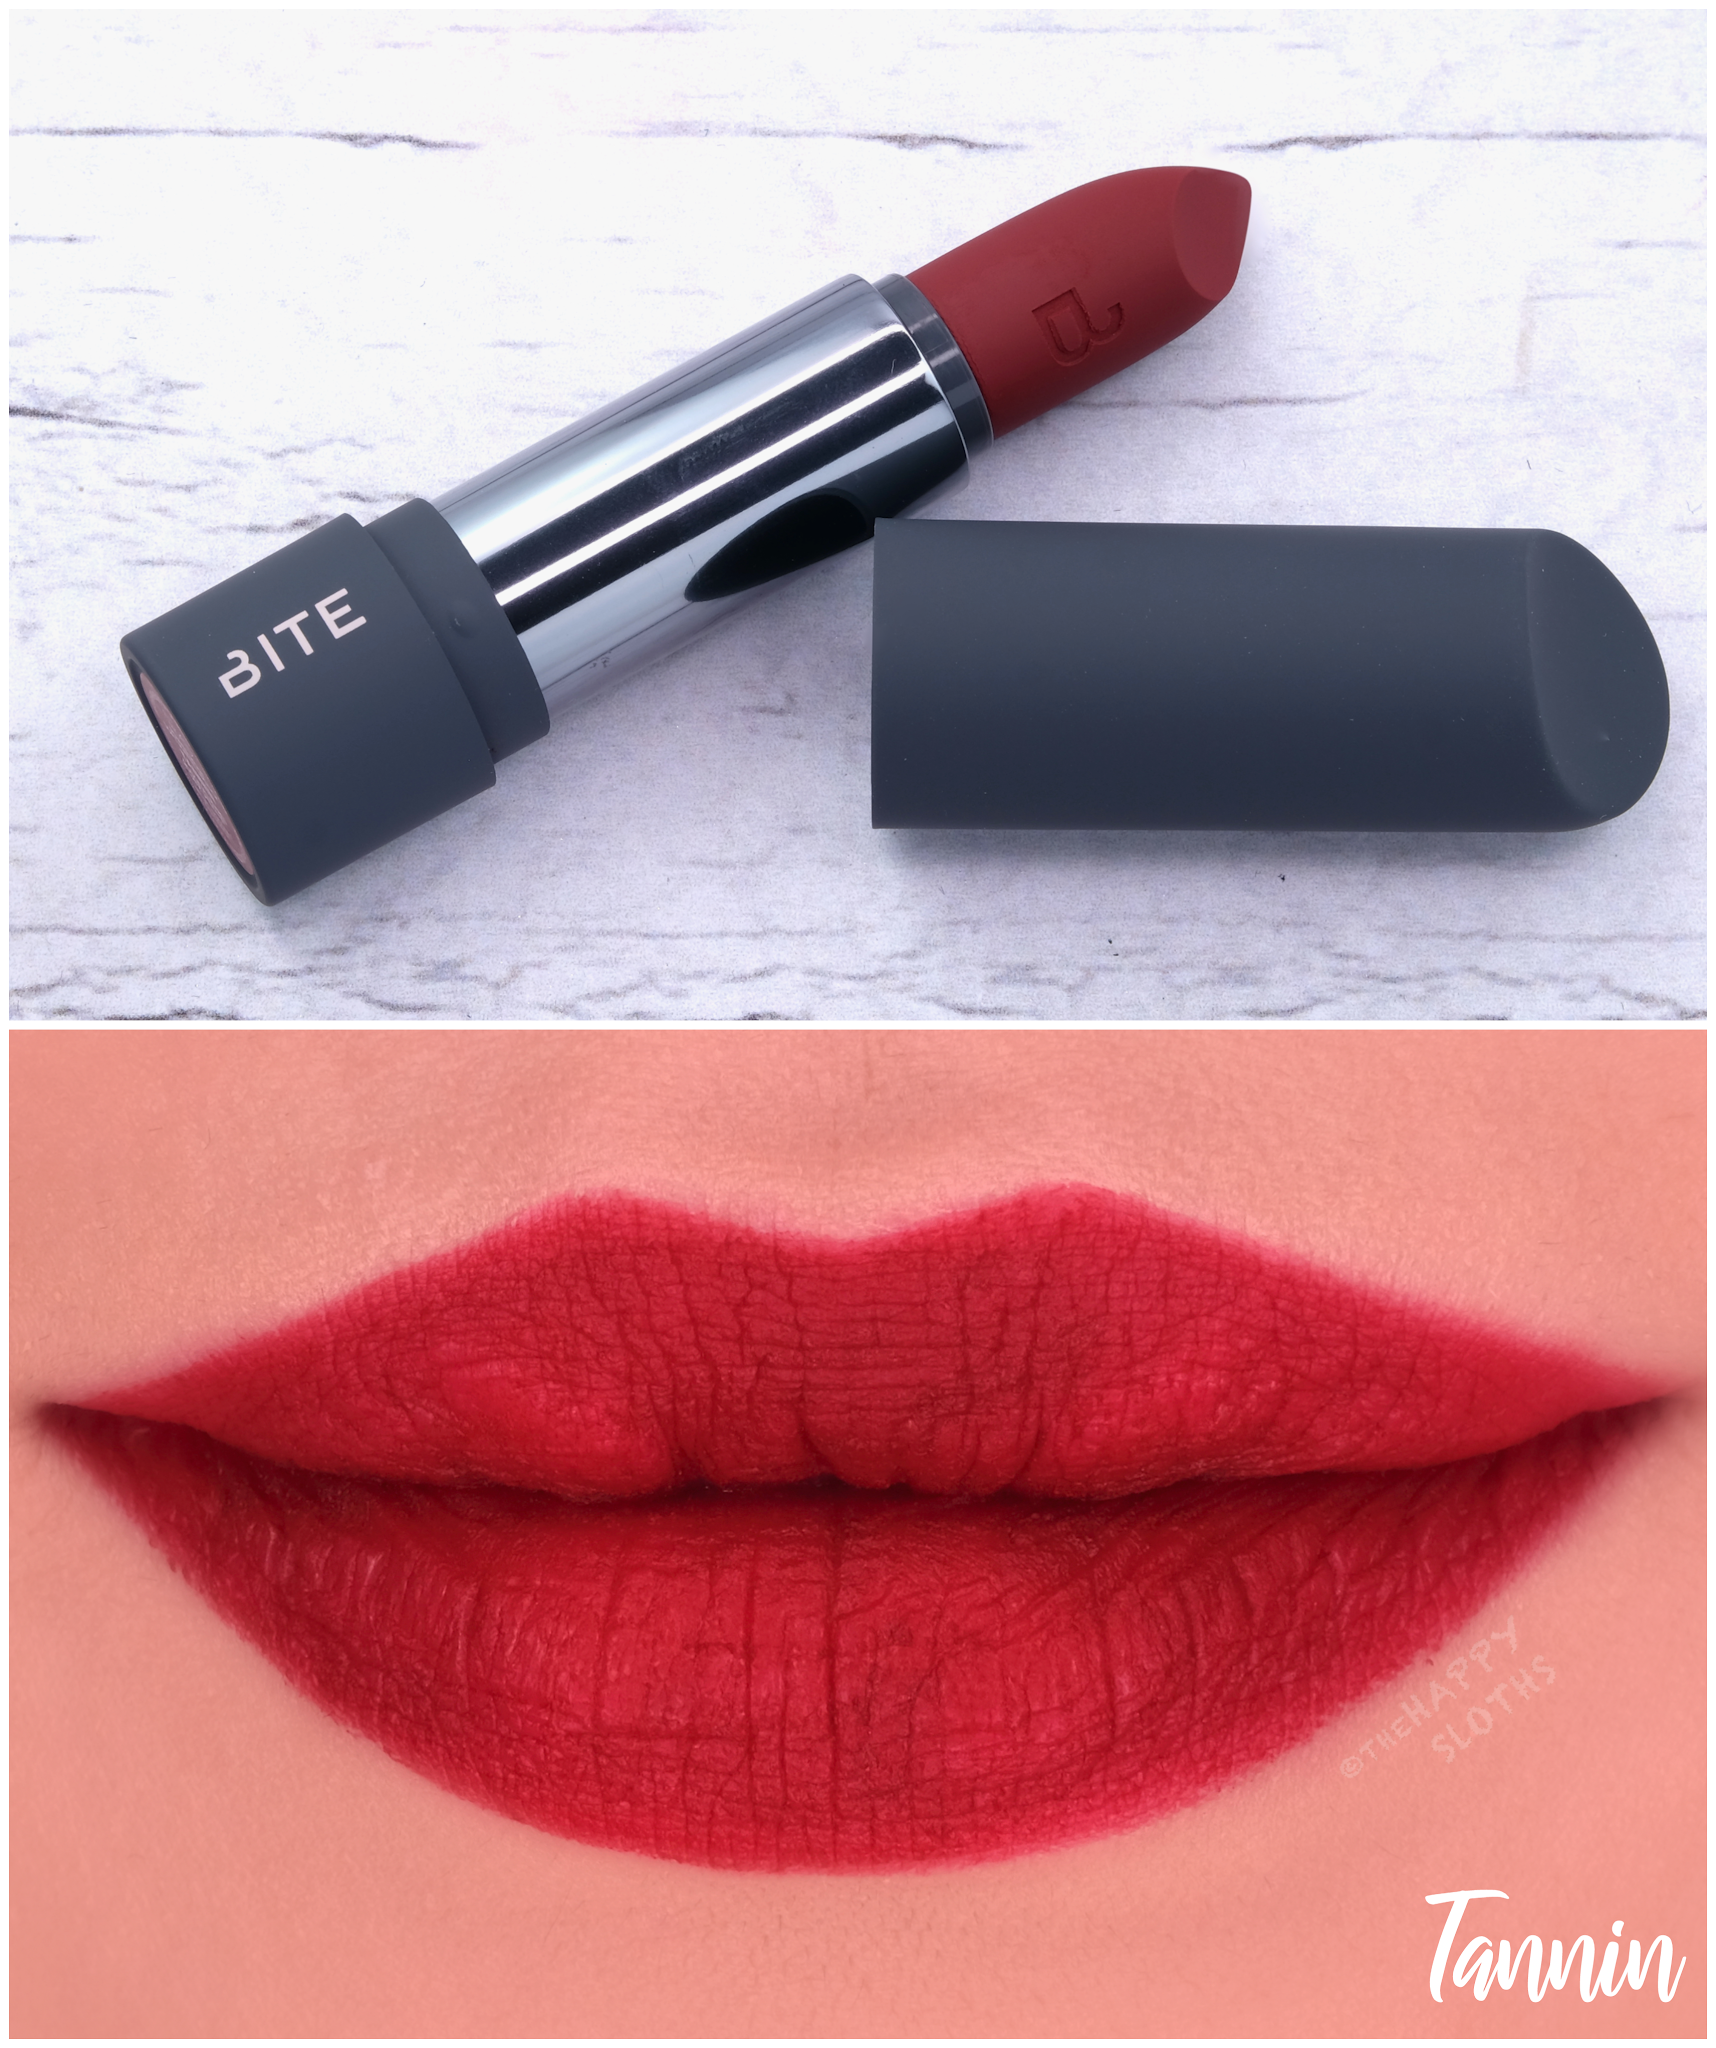 Bite Beauty | Power Move Soft Matte Lipstick in "Tannin": Review and Swatches